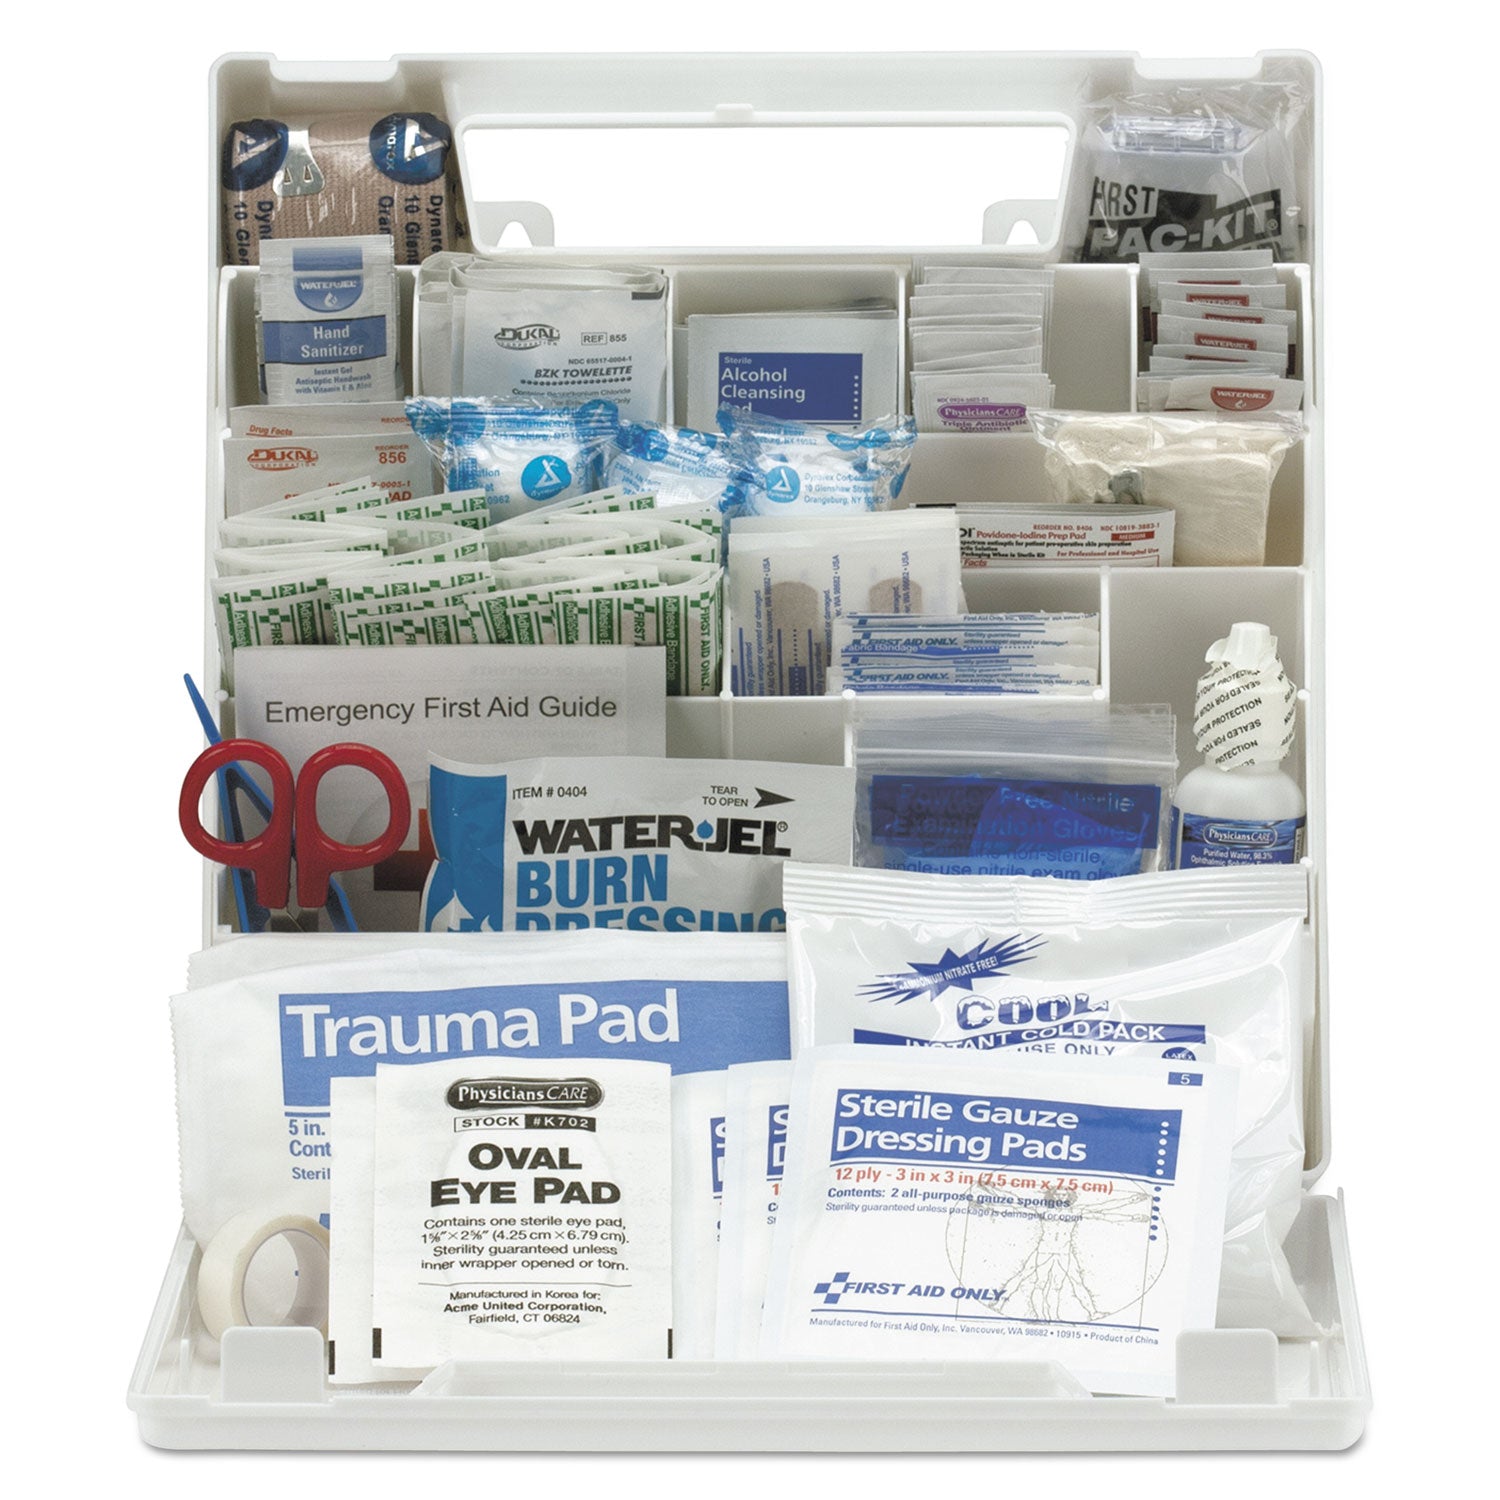 ansi-class-a+-first-aid-kit-for-50-people-183-pieces-plastic-case_fao90639 - 2